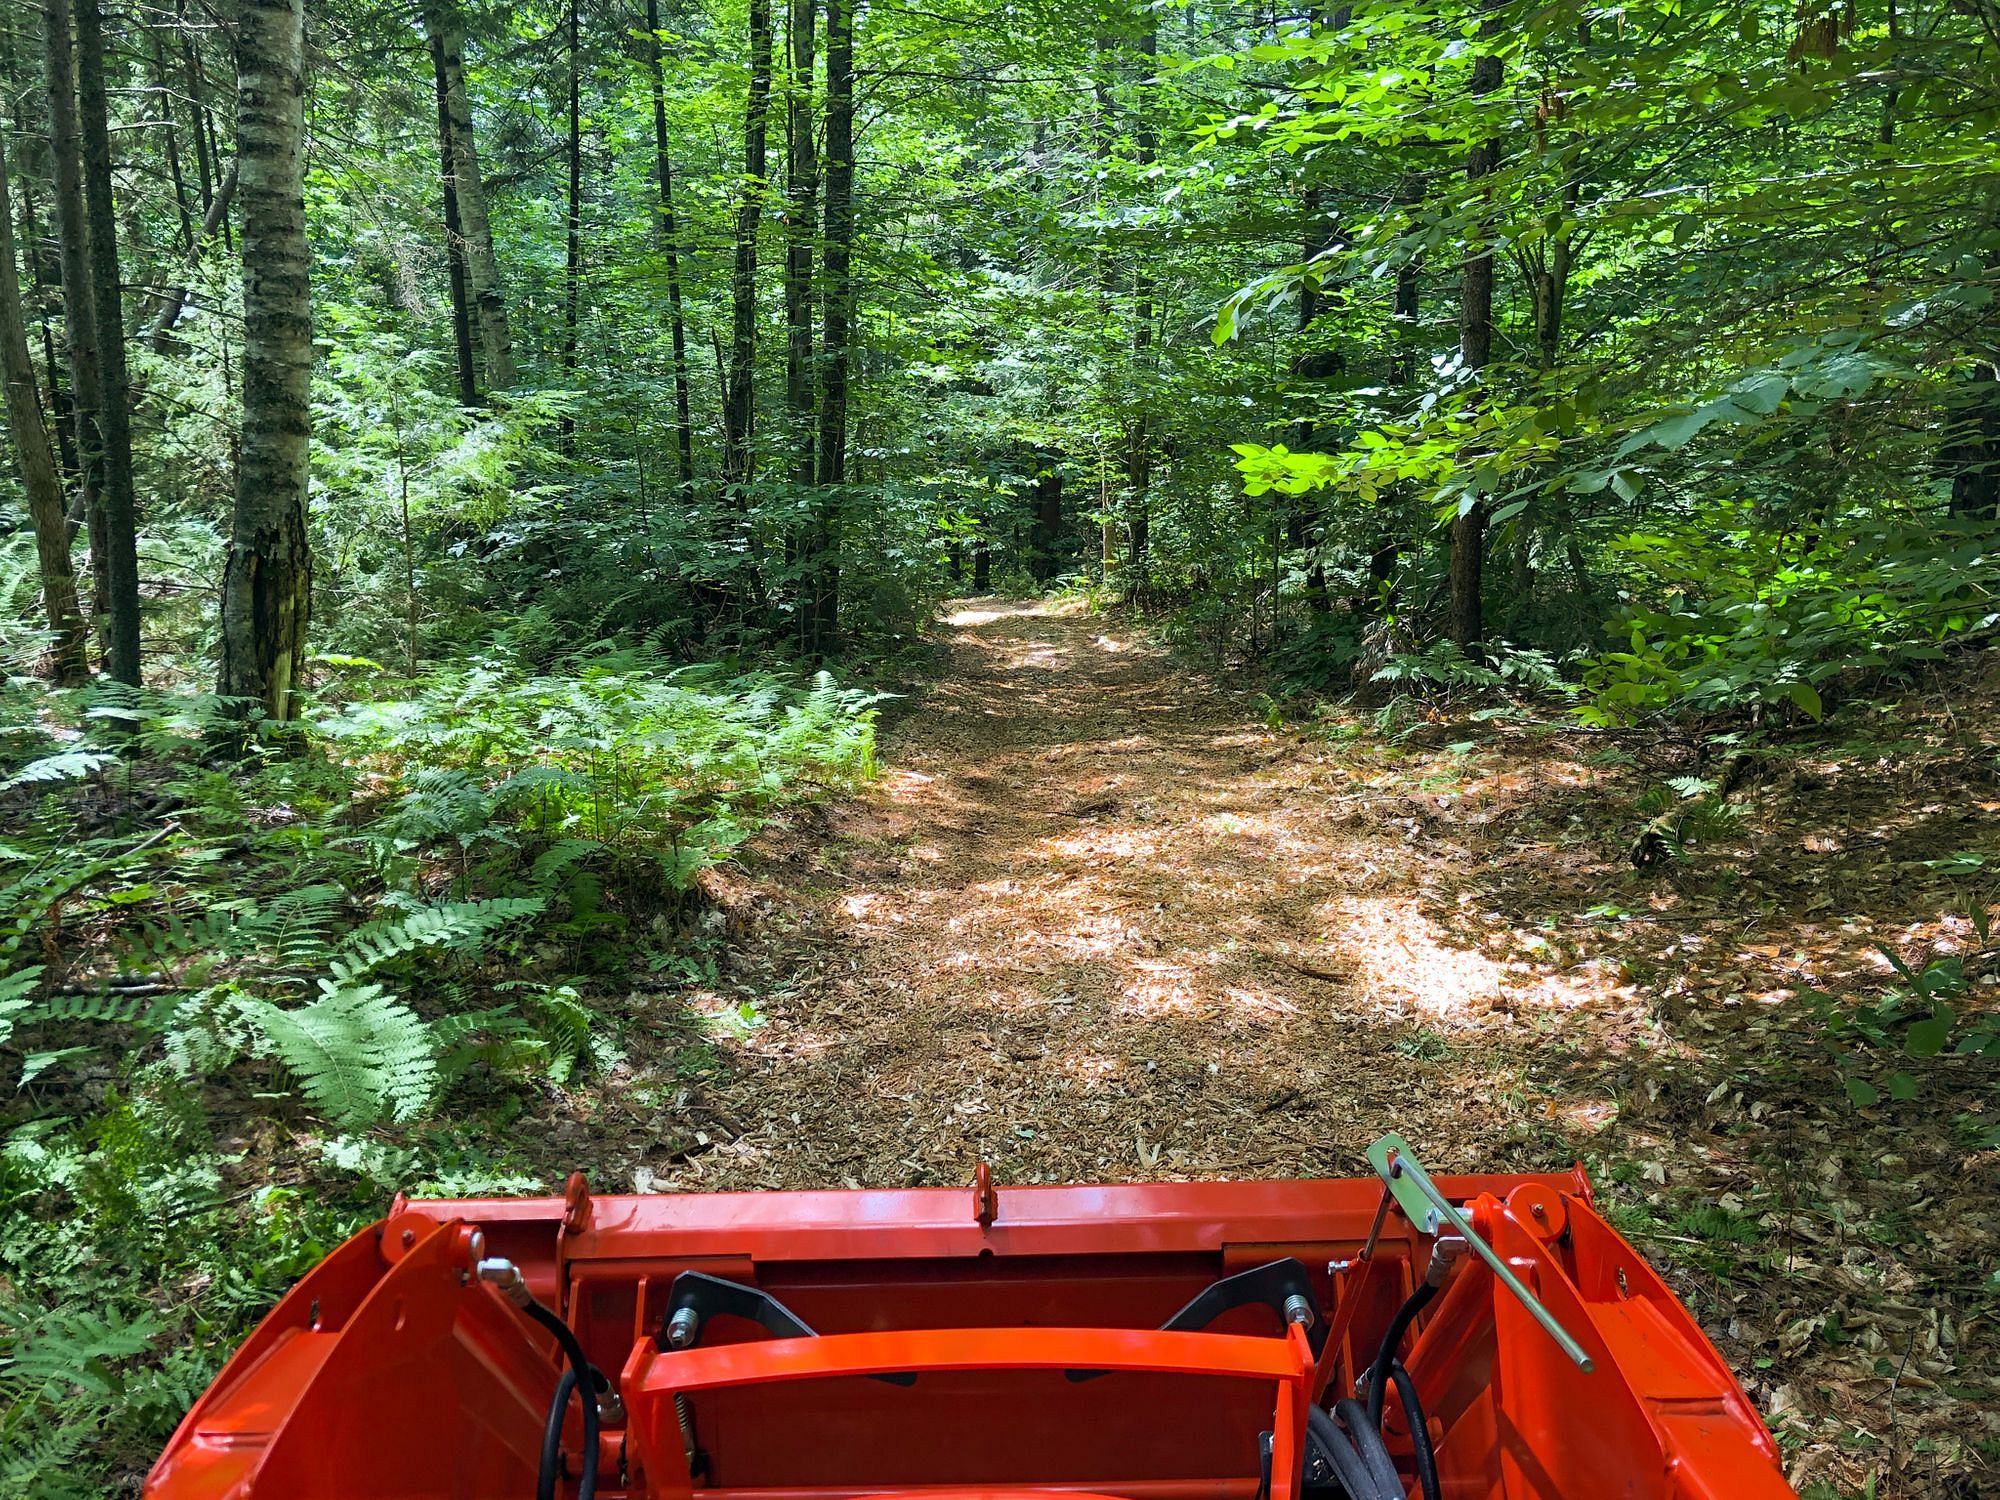 Wood Chips on Trail